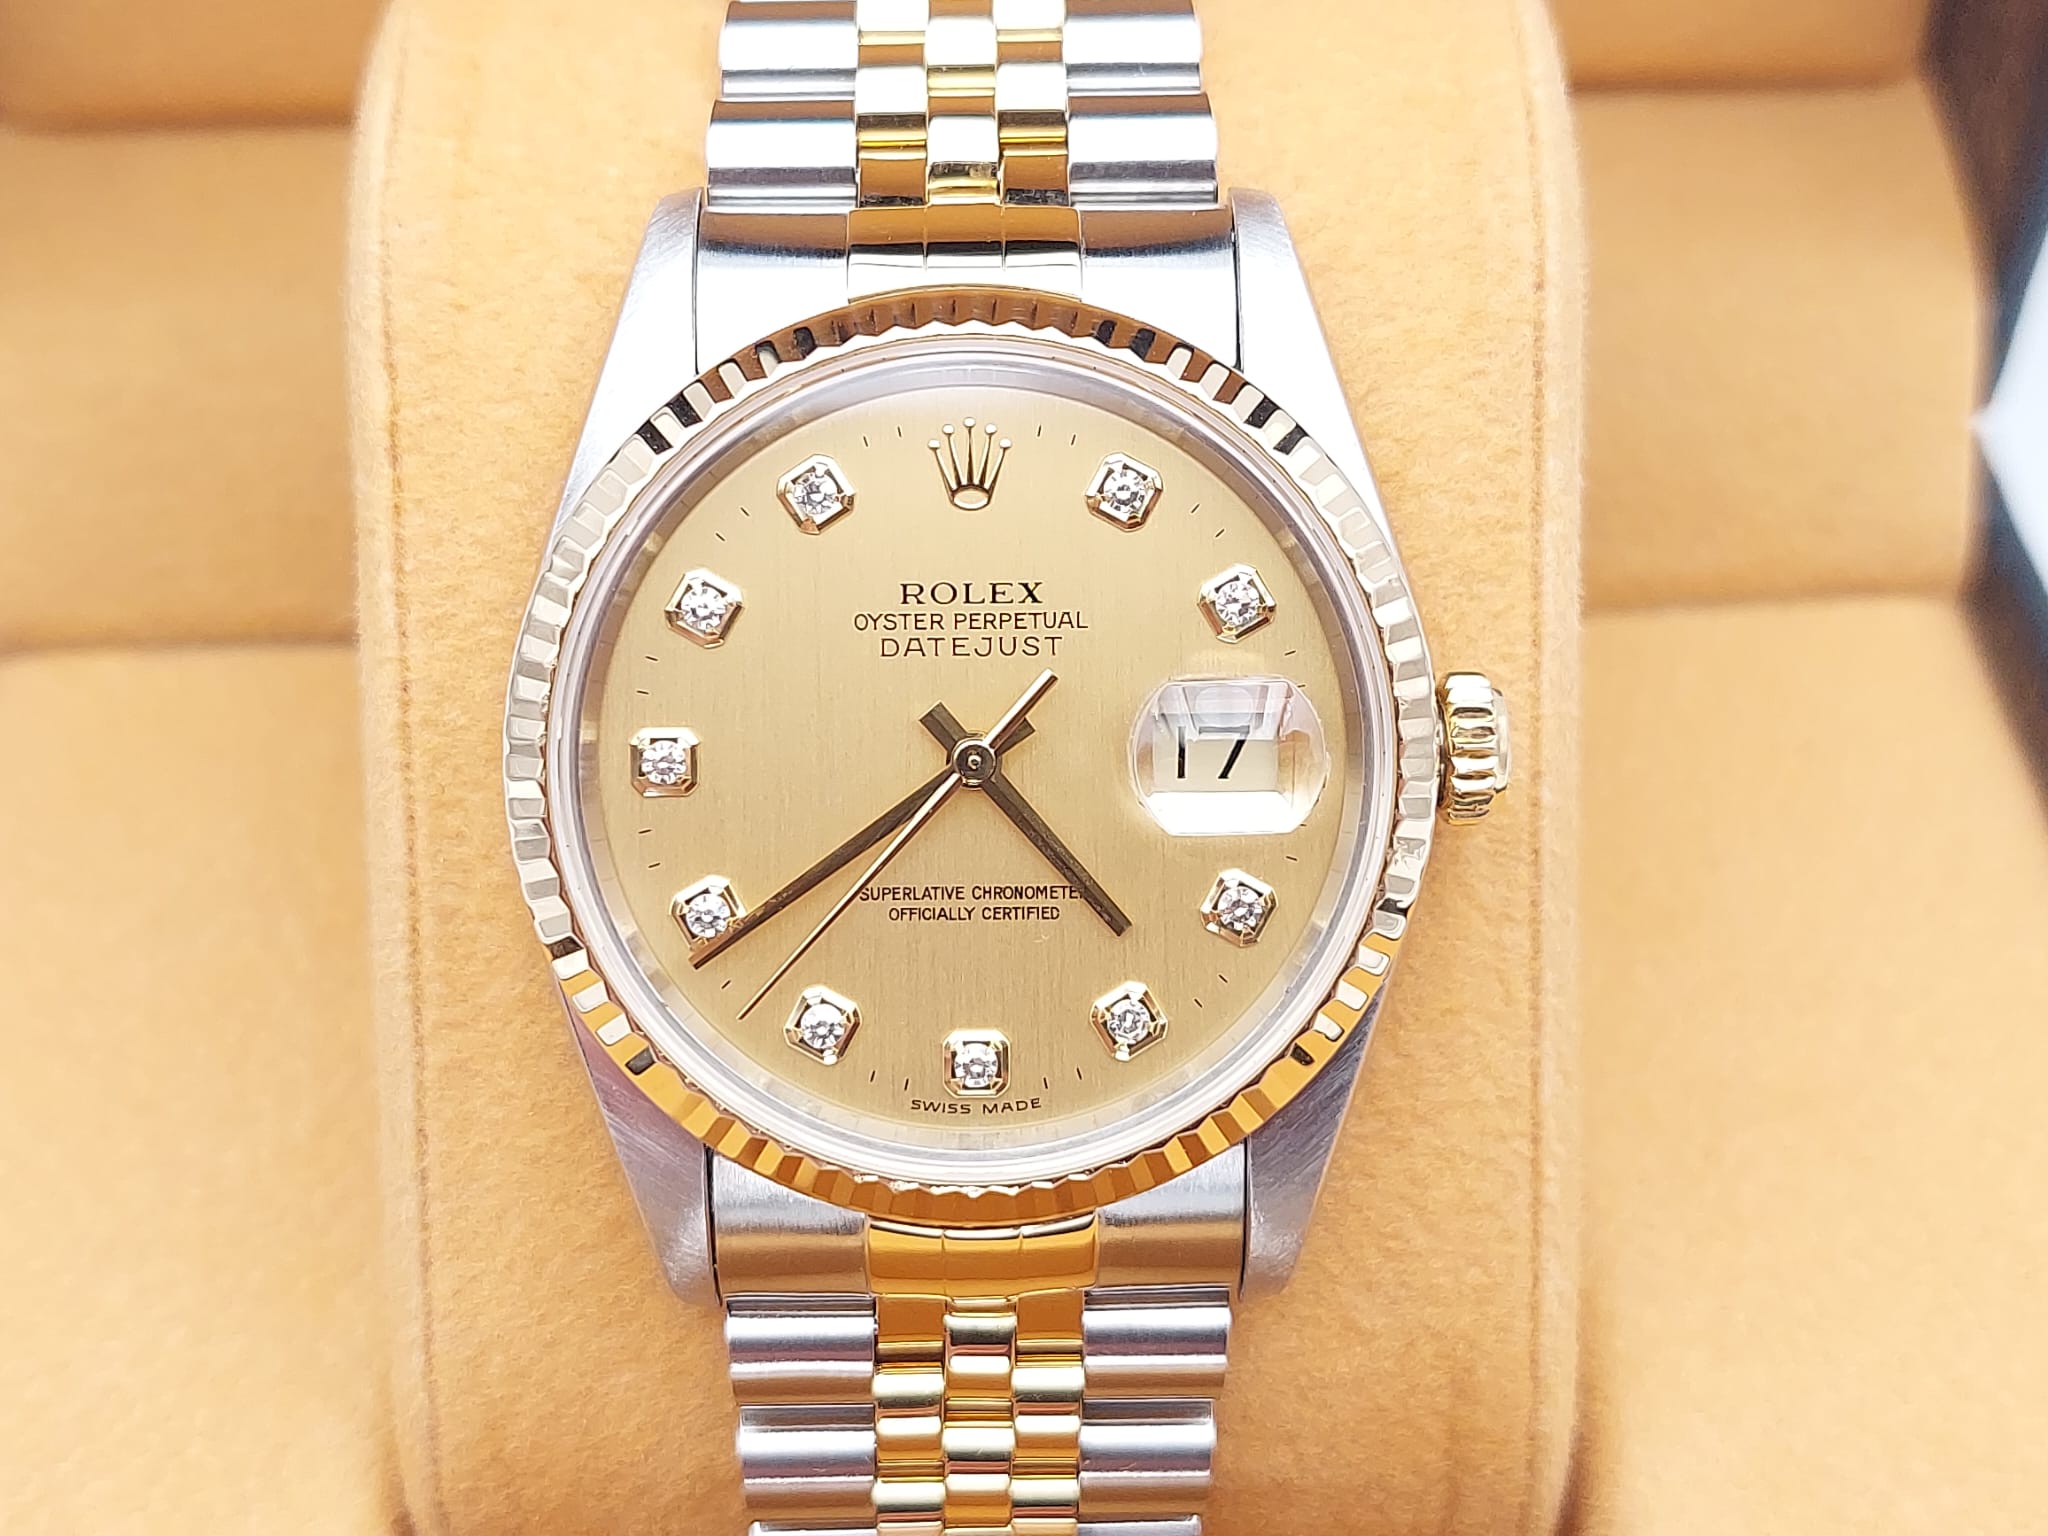 Rolex Datejust Ref. 16233 Year 1991 (Box & Papers)